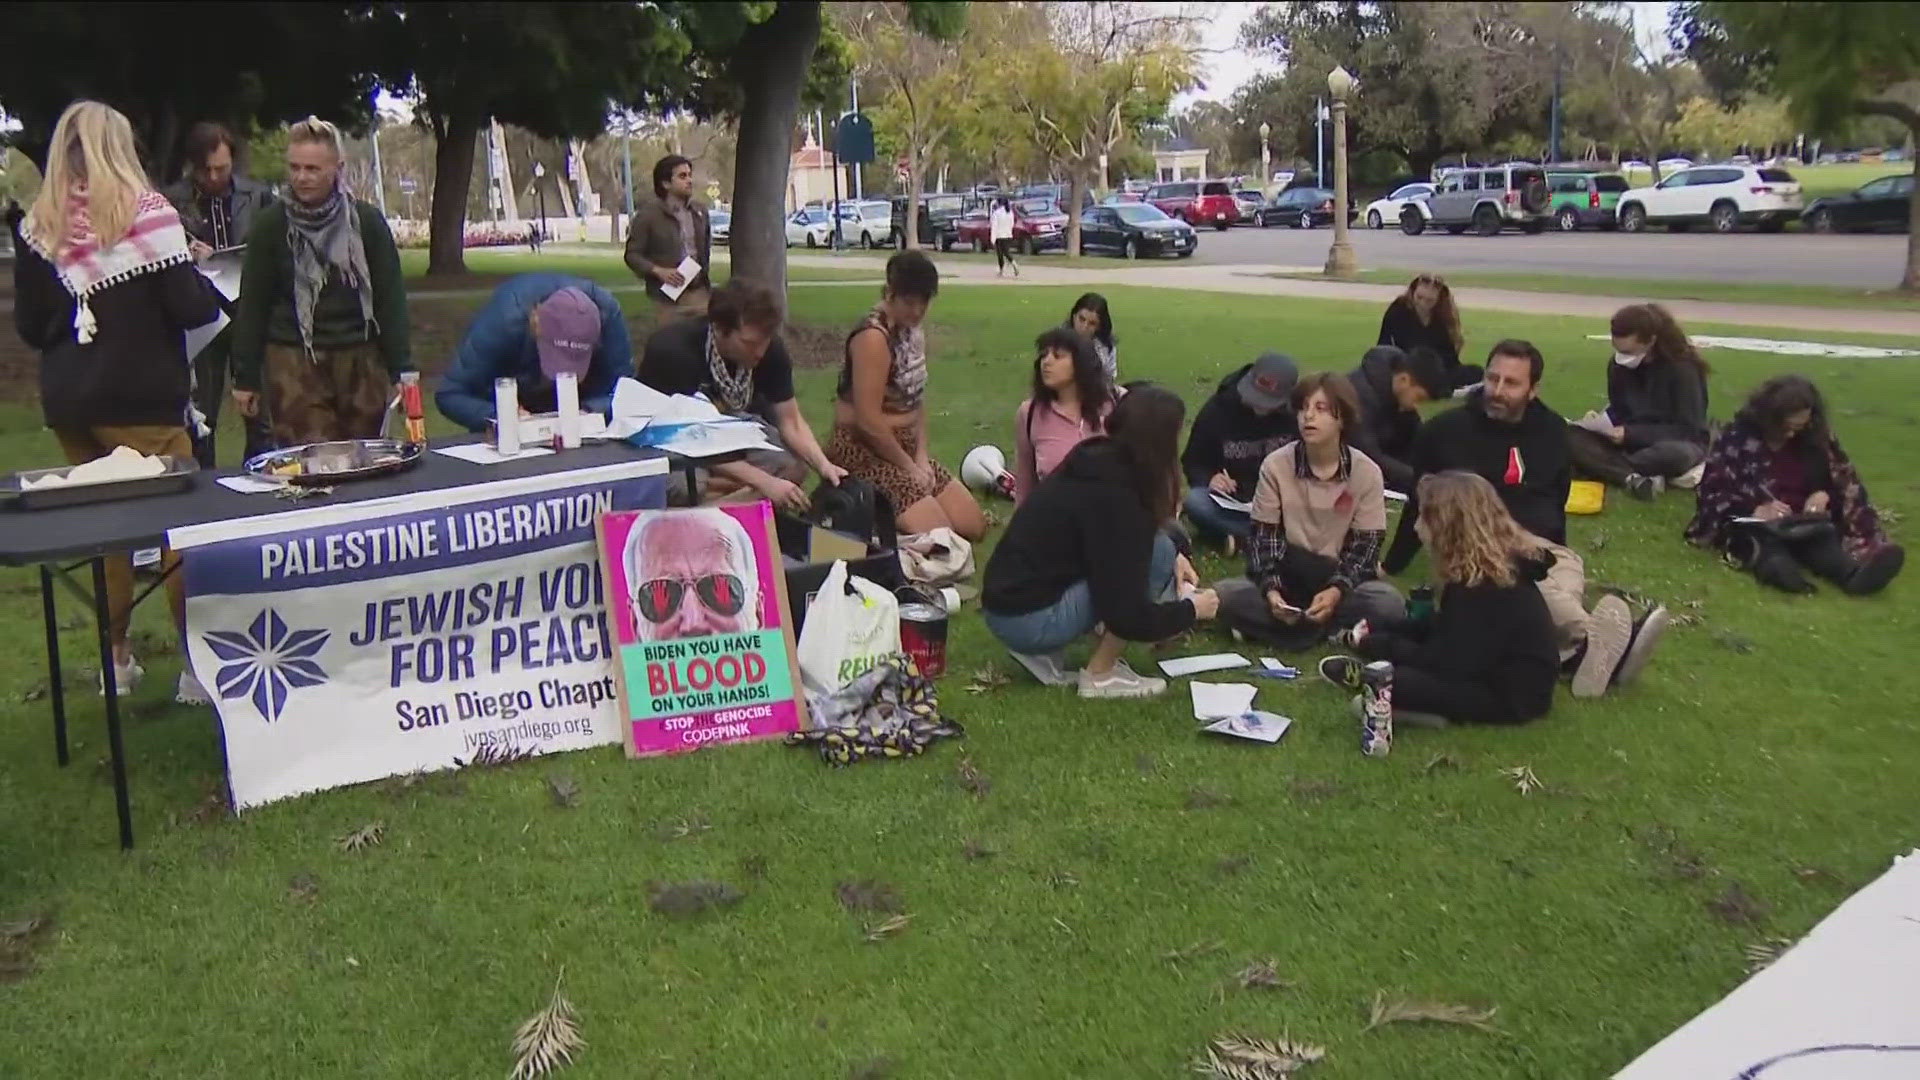 The demonstrators held a rally at Balboa Park Wednesday to protest the humanitarian catastrophe in Gaza.